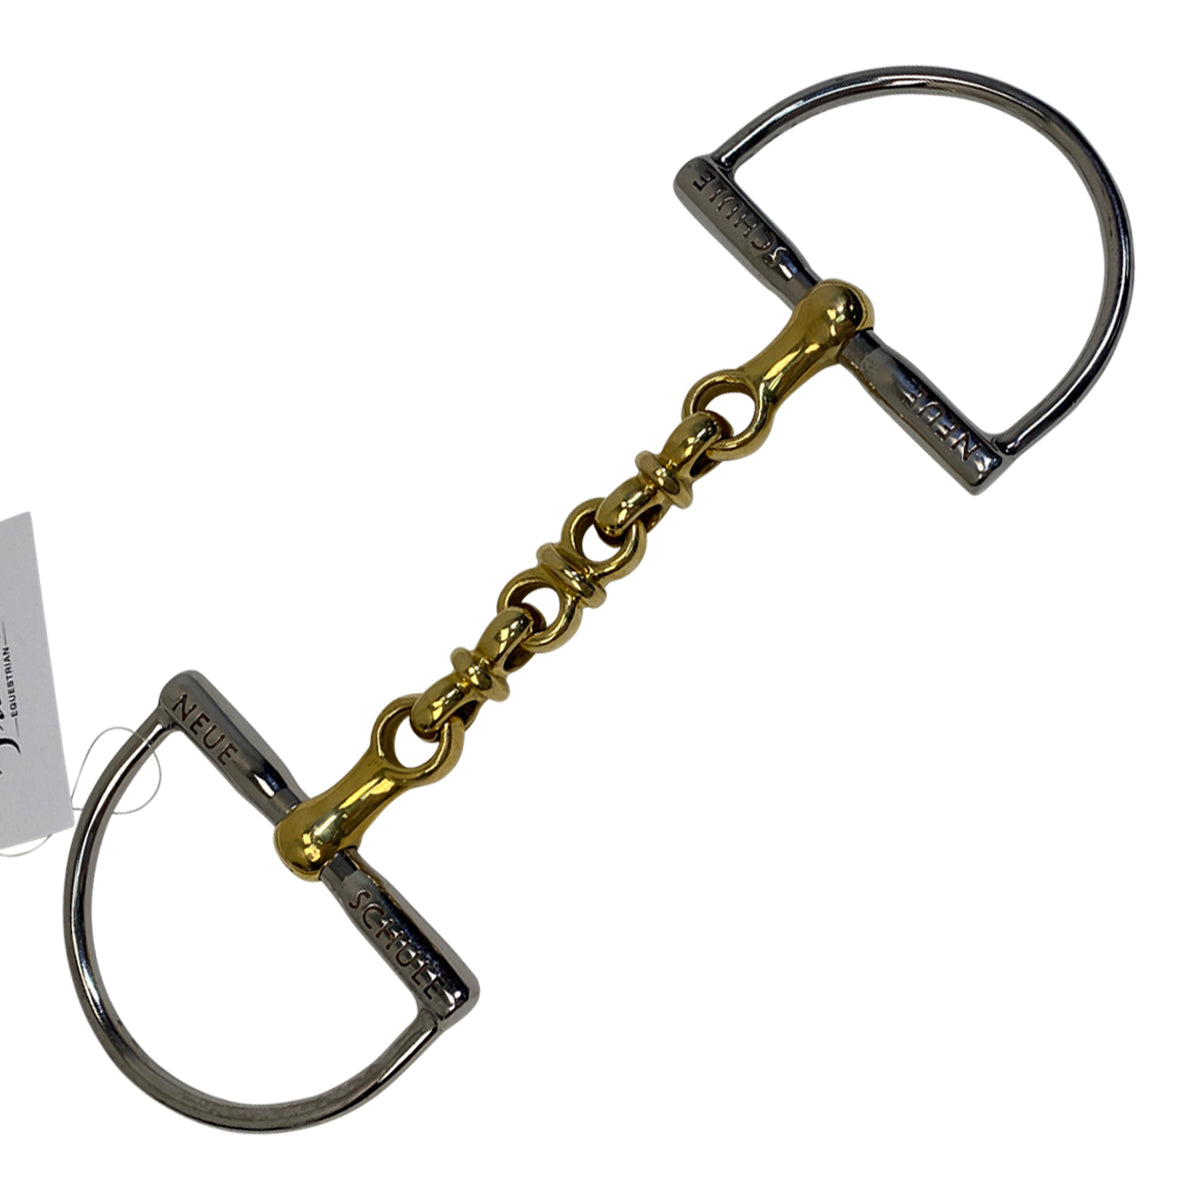 Neue Schule Waterford Hunter D-Ring Bit in Stainless Steel/Salox Gold